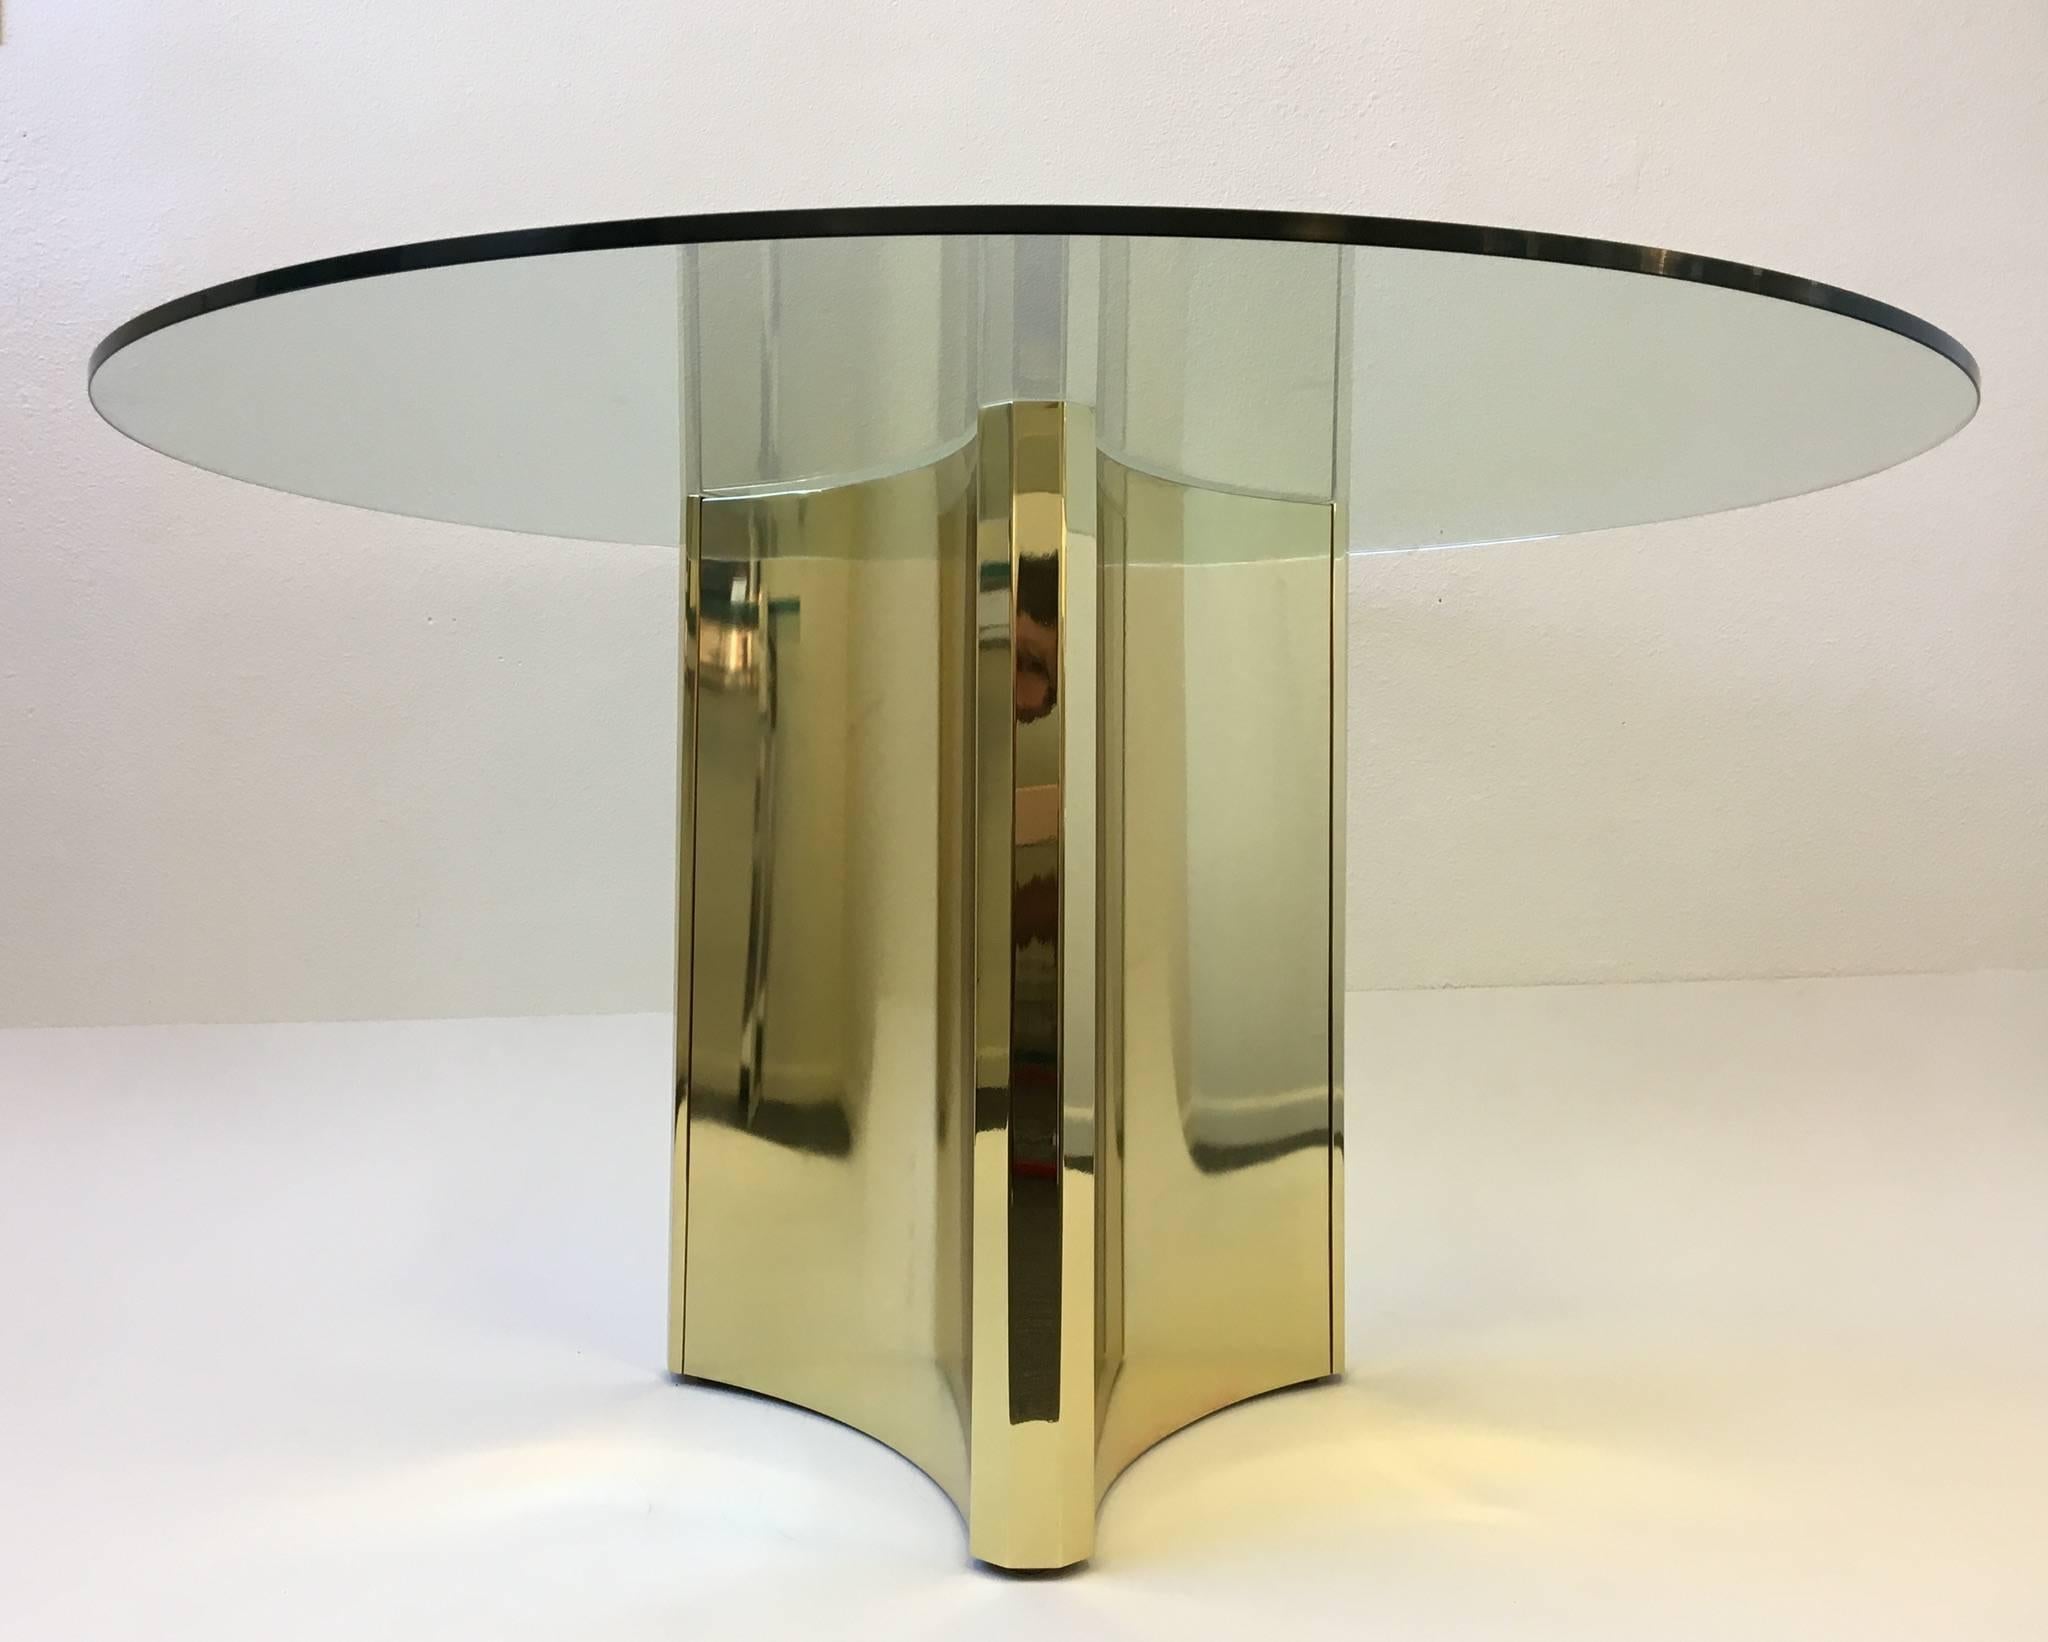 A glamorous polished brass and glass design by Mastercraft in the 1970s.
Measures: New 1/2